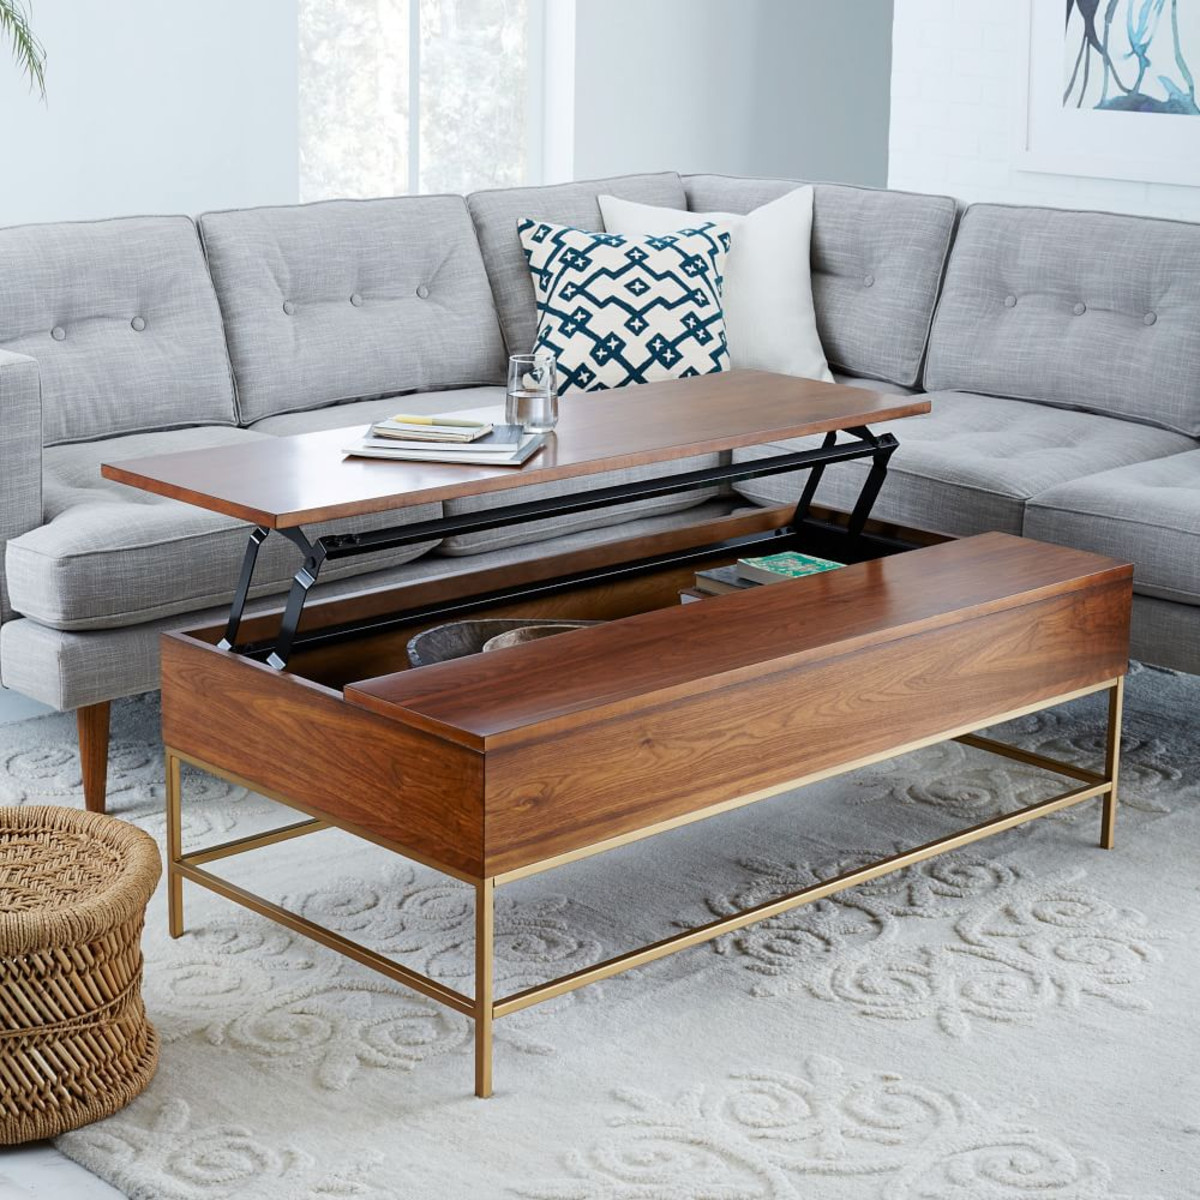 Living Room Table With Storage
 8 Best Coffee Tables For Small Spaces